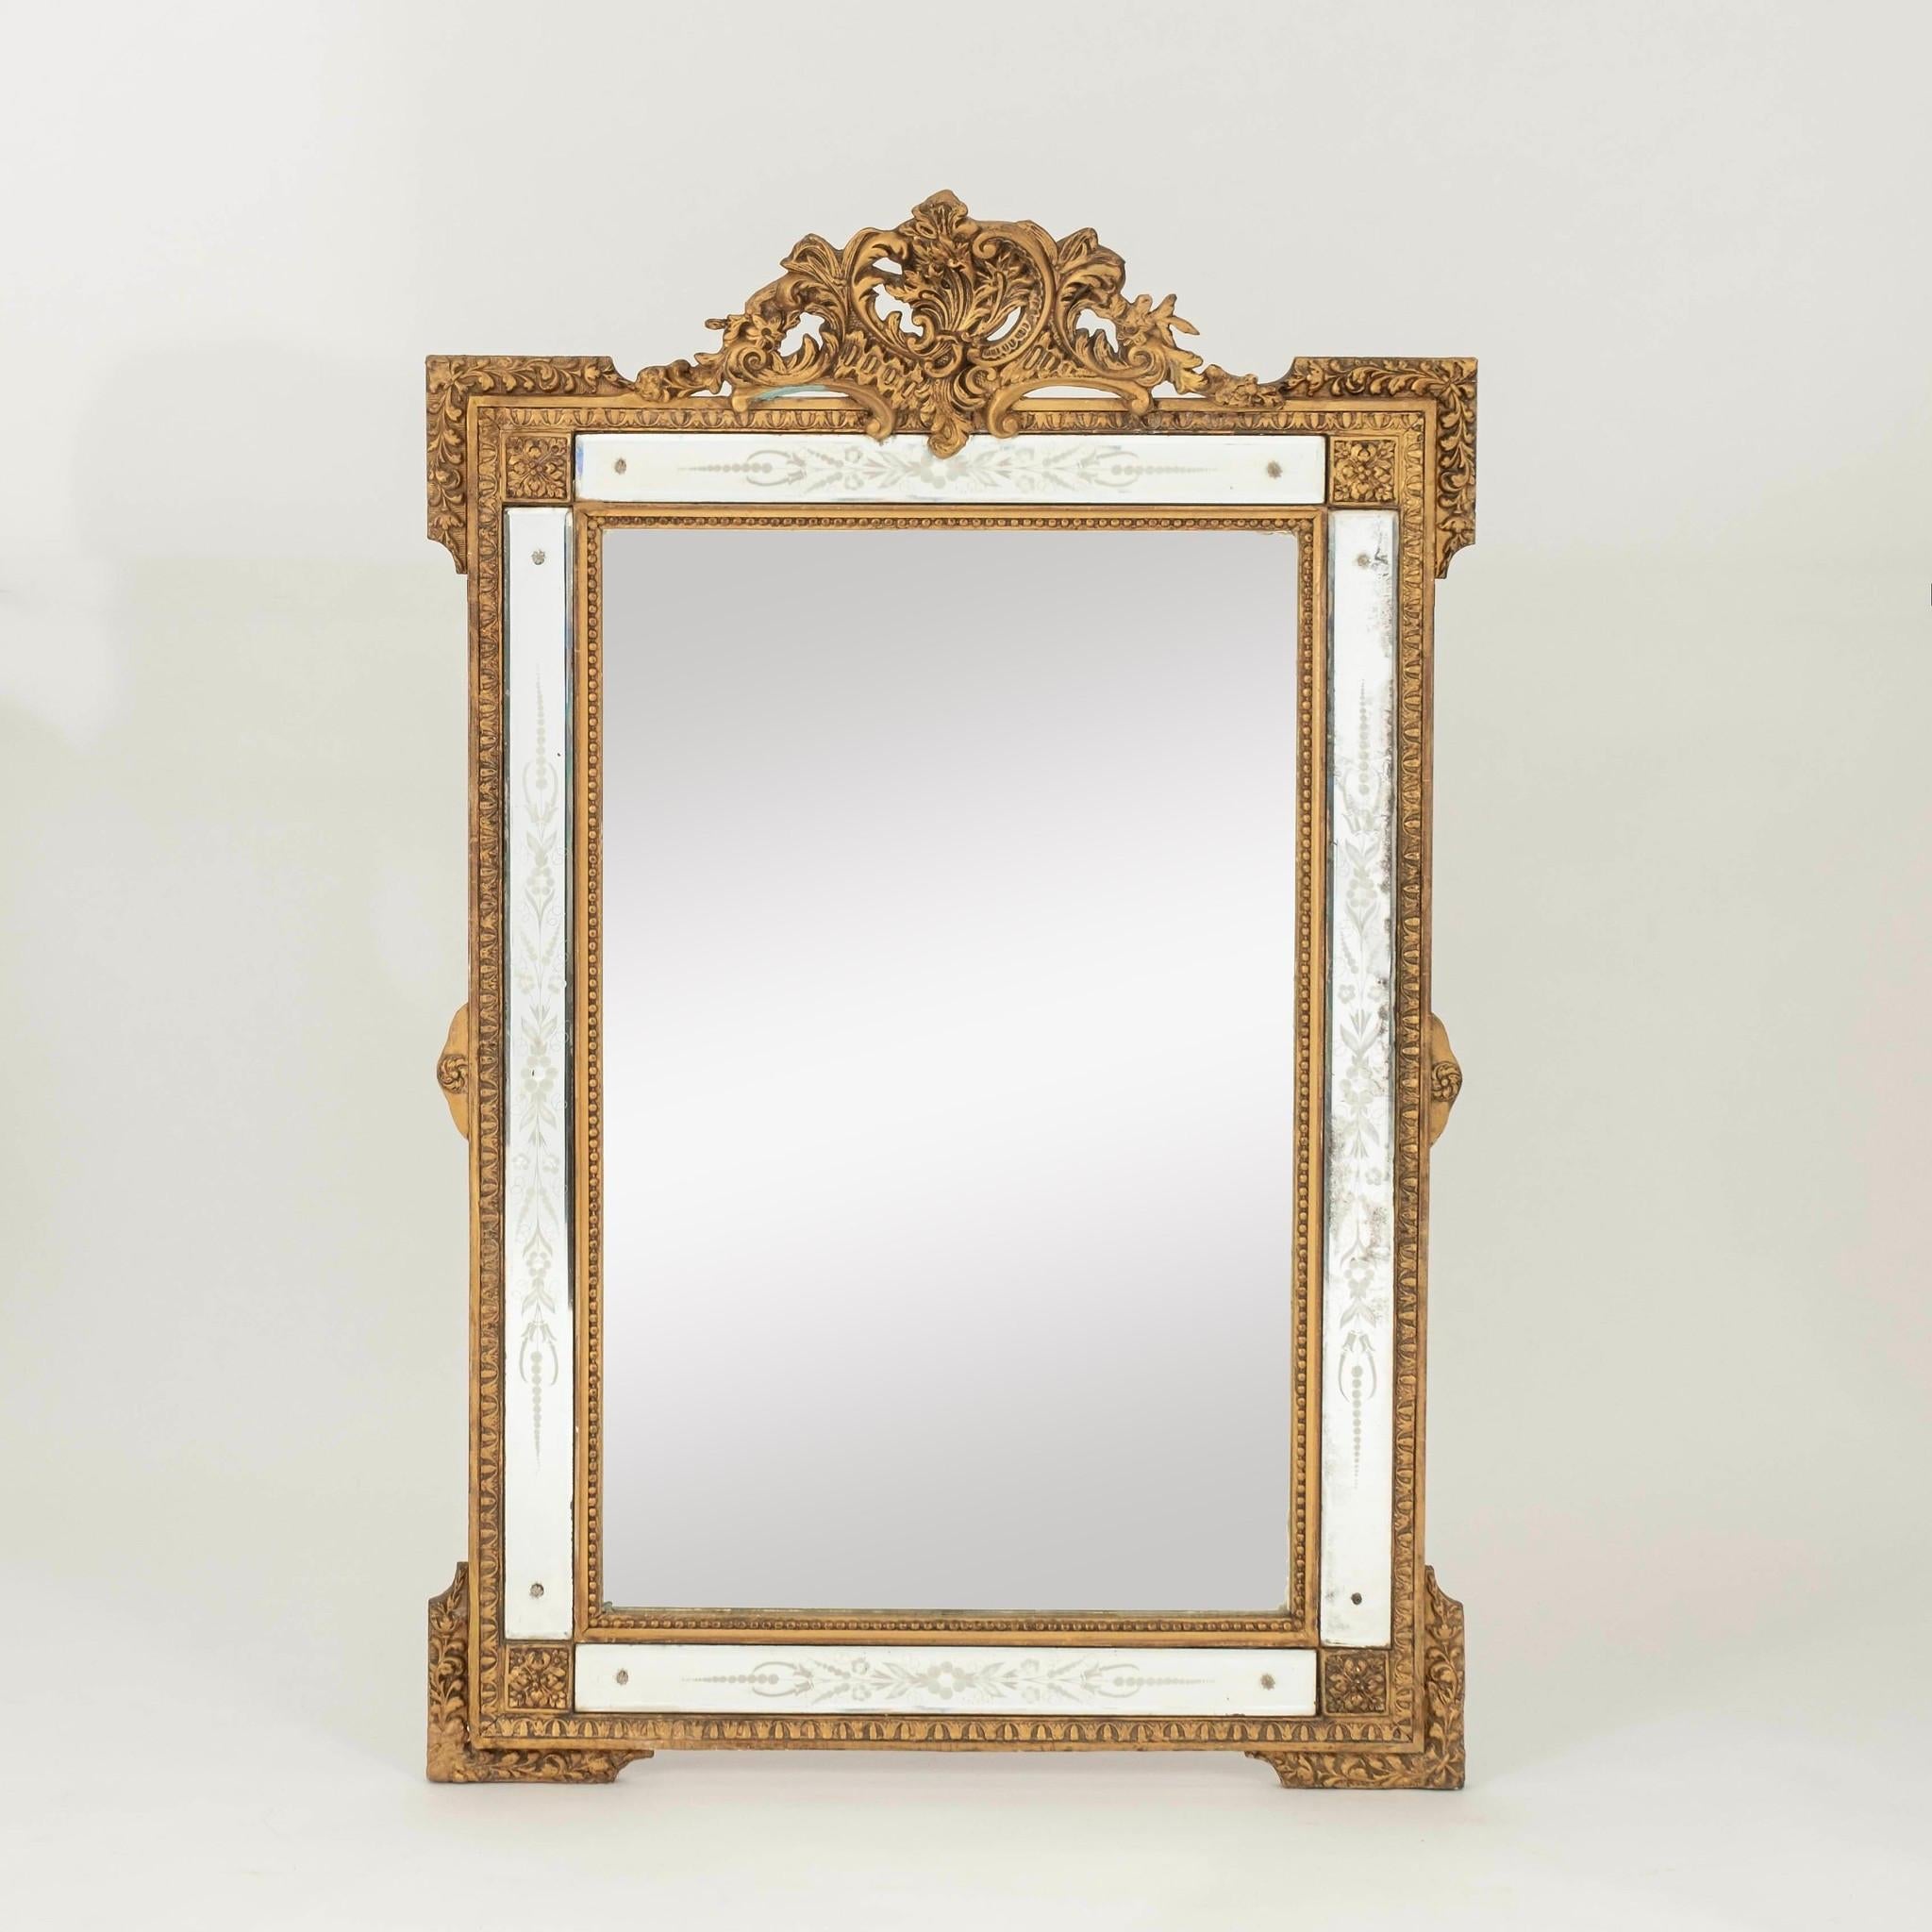 A 20th Century or earlier Louis XV style parclose giltwood mirror with etched floral and foliage detail.